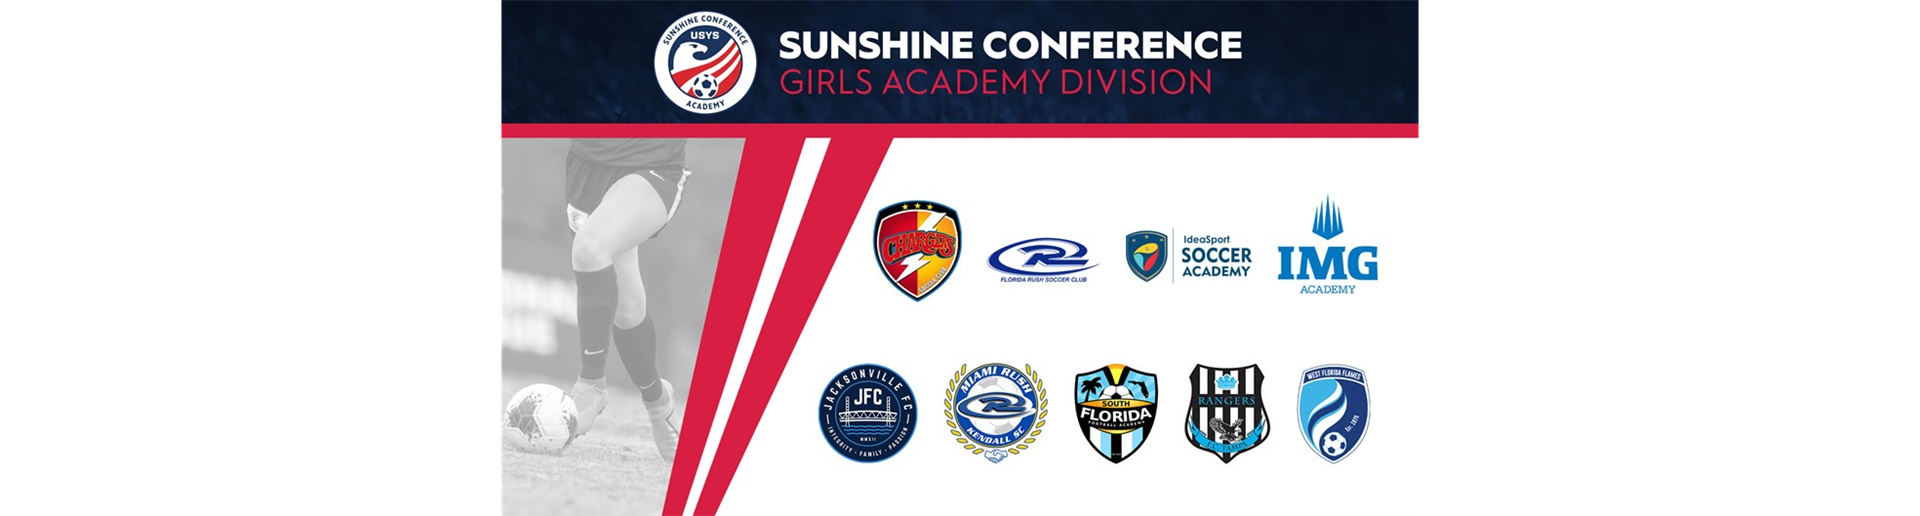 USYS Sunshine Conference Girls Academy Division to debut in 2021-22 season